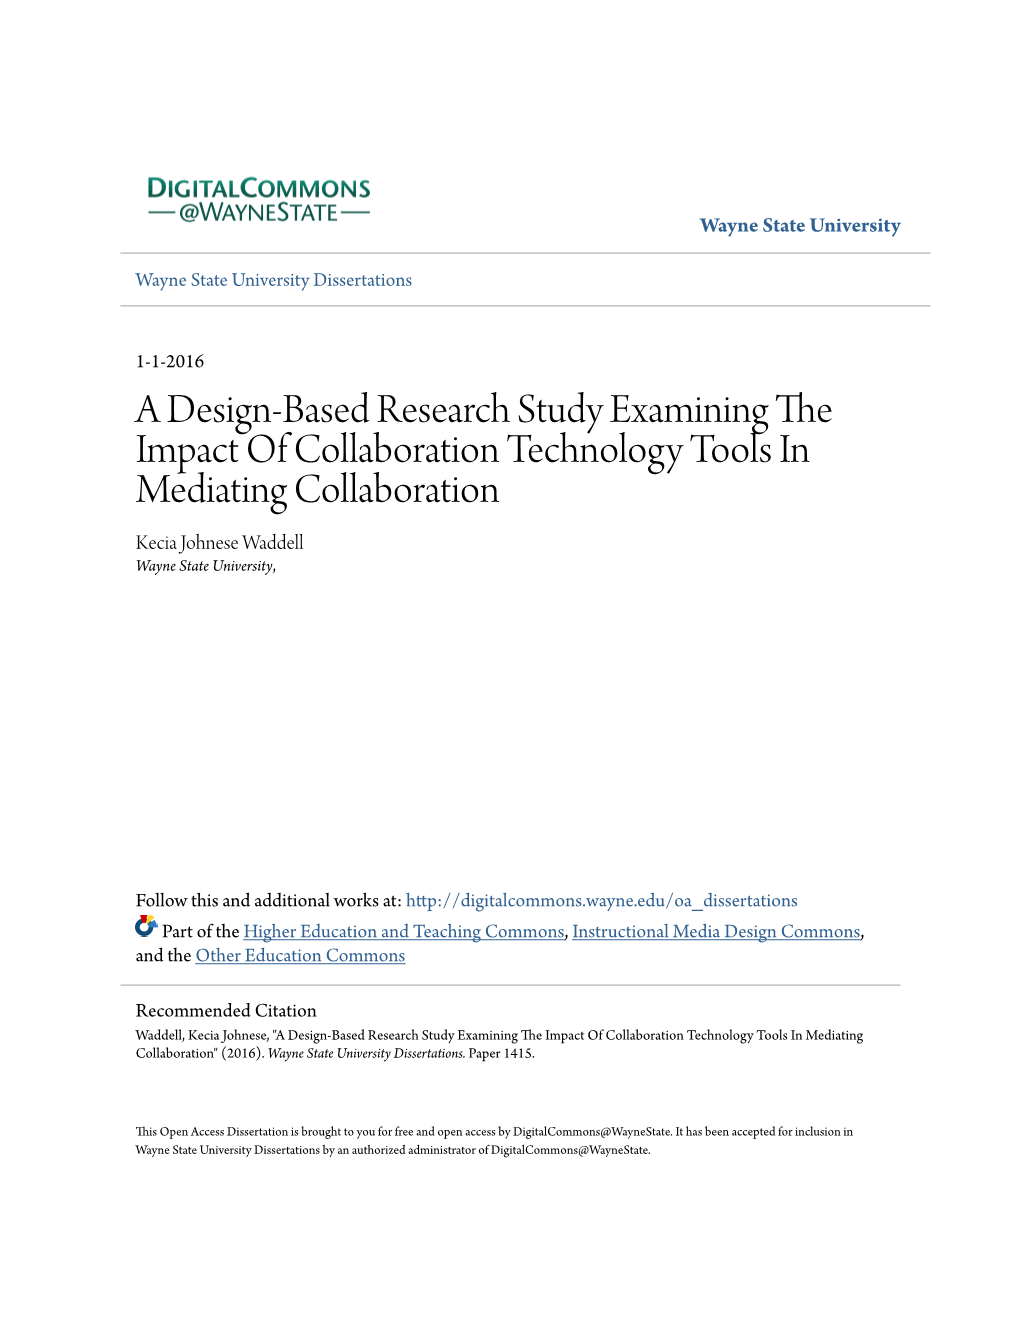 A Design-Based Research Study Examining the Impact of Collaboration Technology Tools in Mediating Collaboration Kecia Johnese Waddell Wayne State University